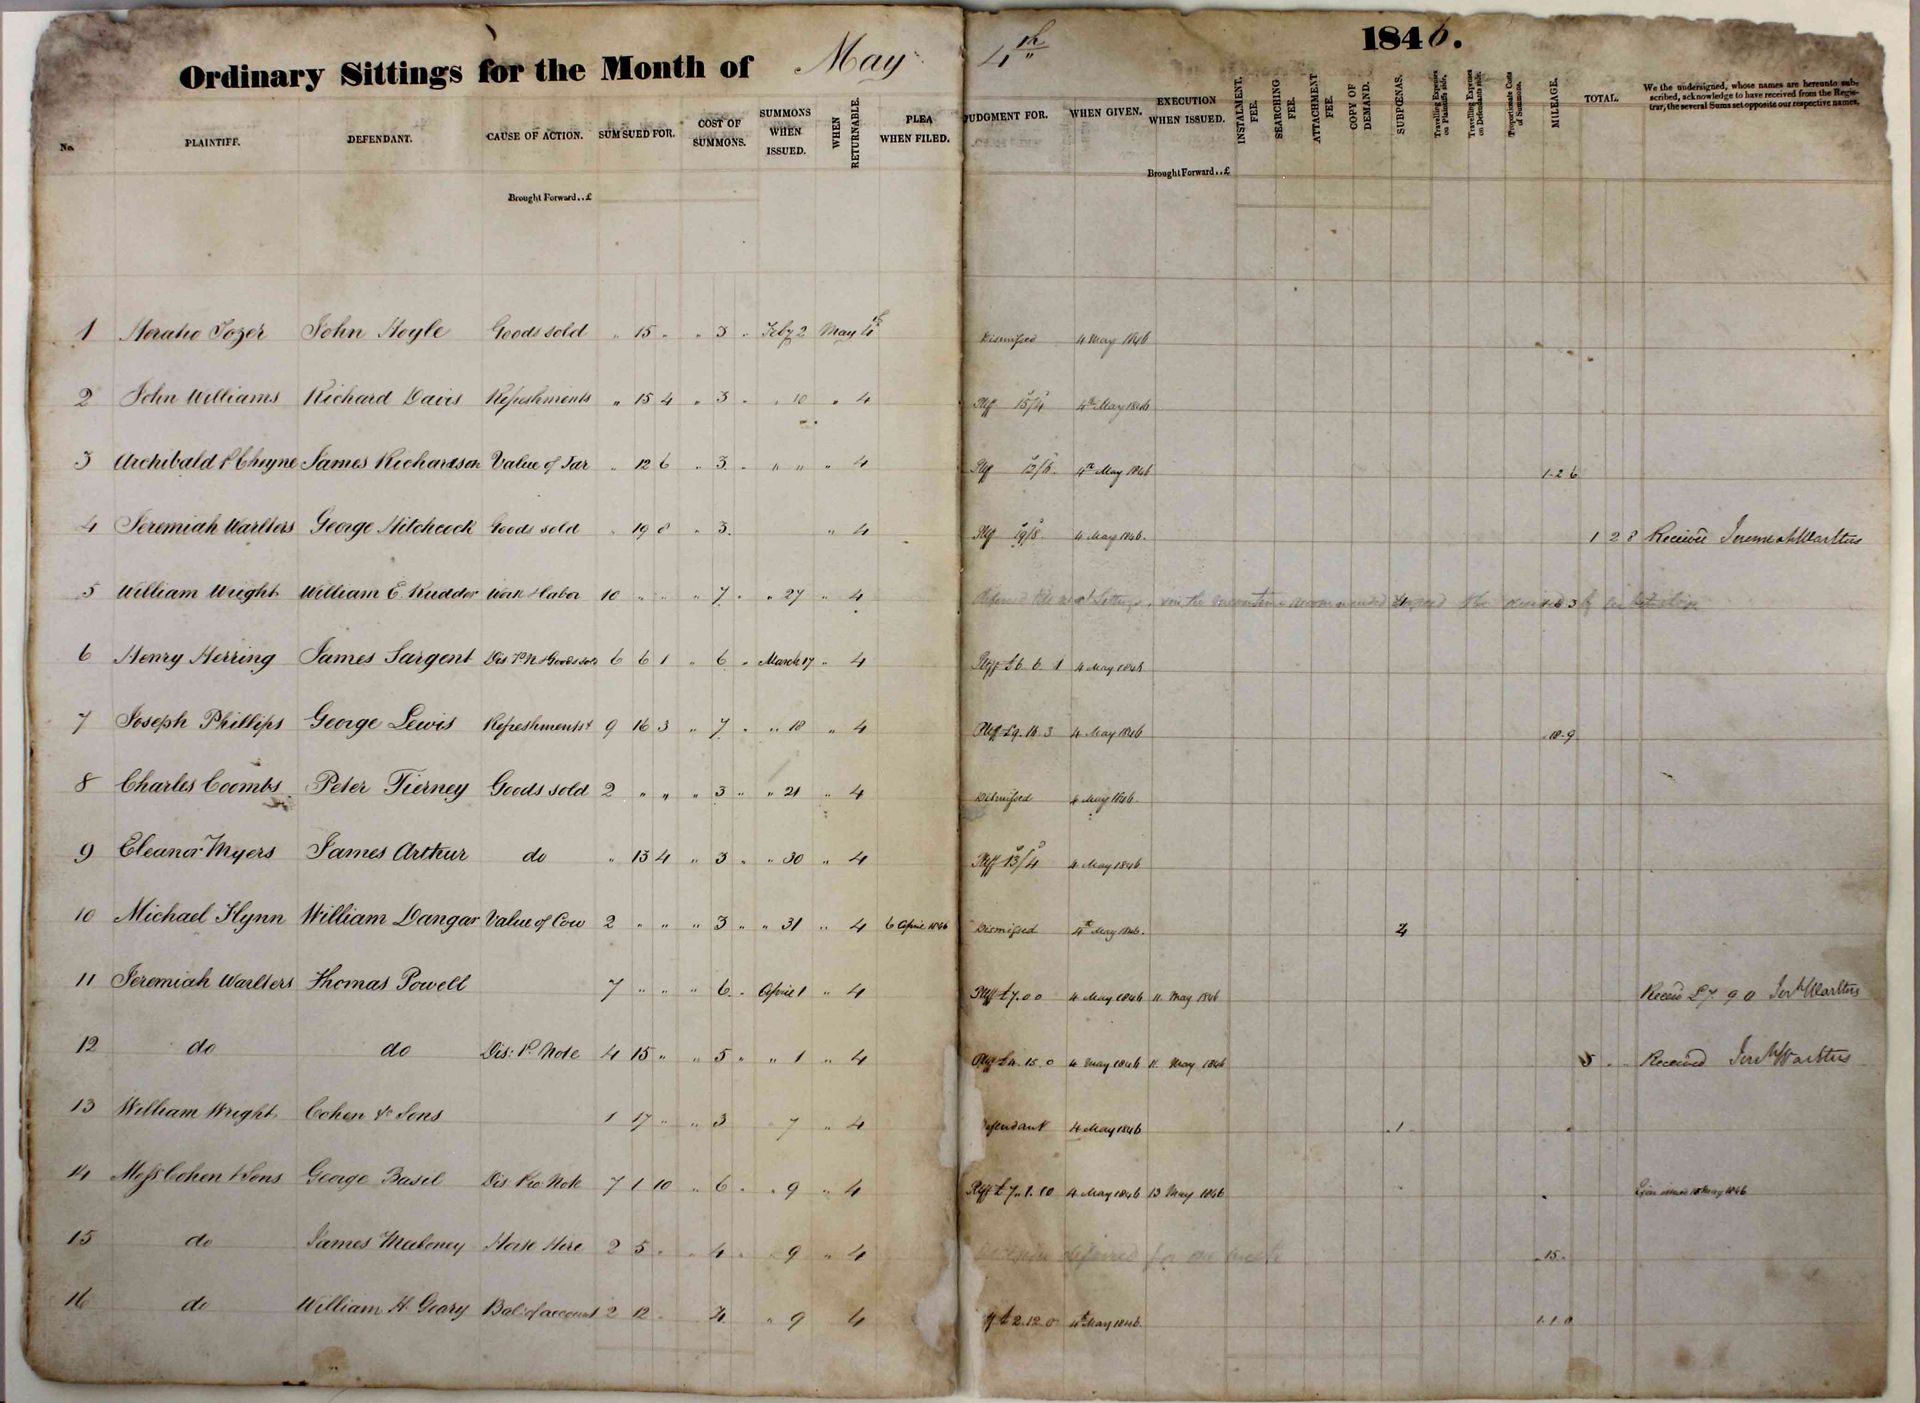 Sample from the Small Debts Register - Port Macquarie Courts of Petty Sessions, 4 May 1846